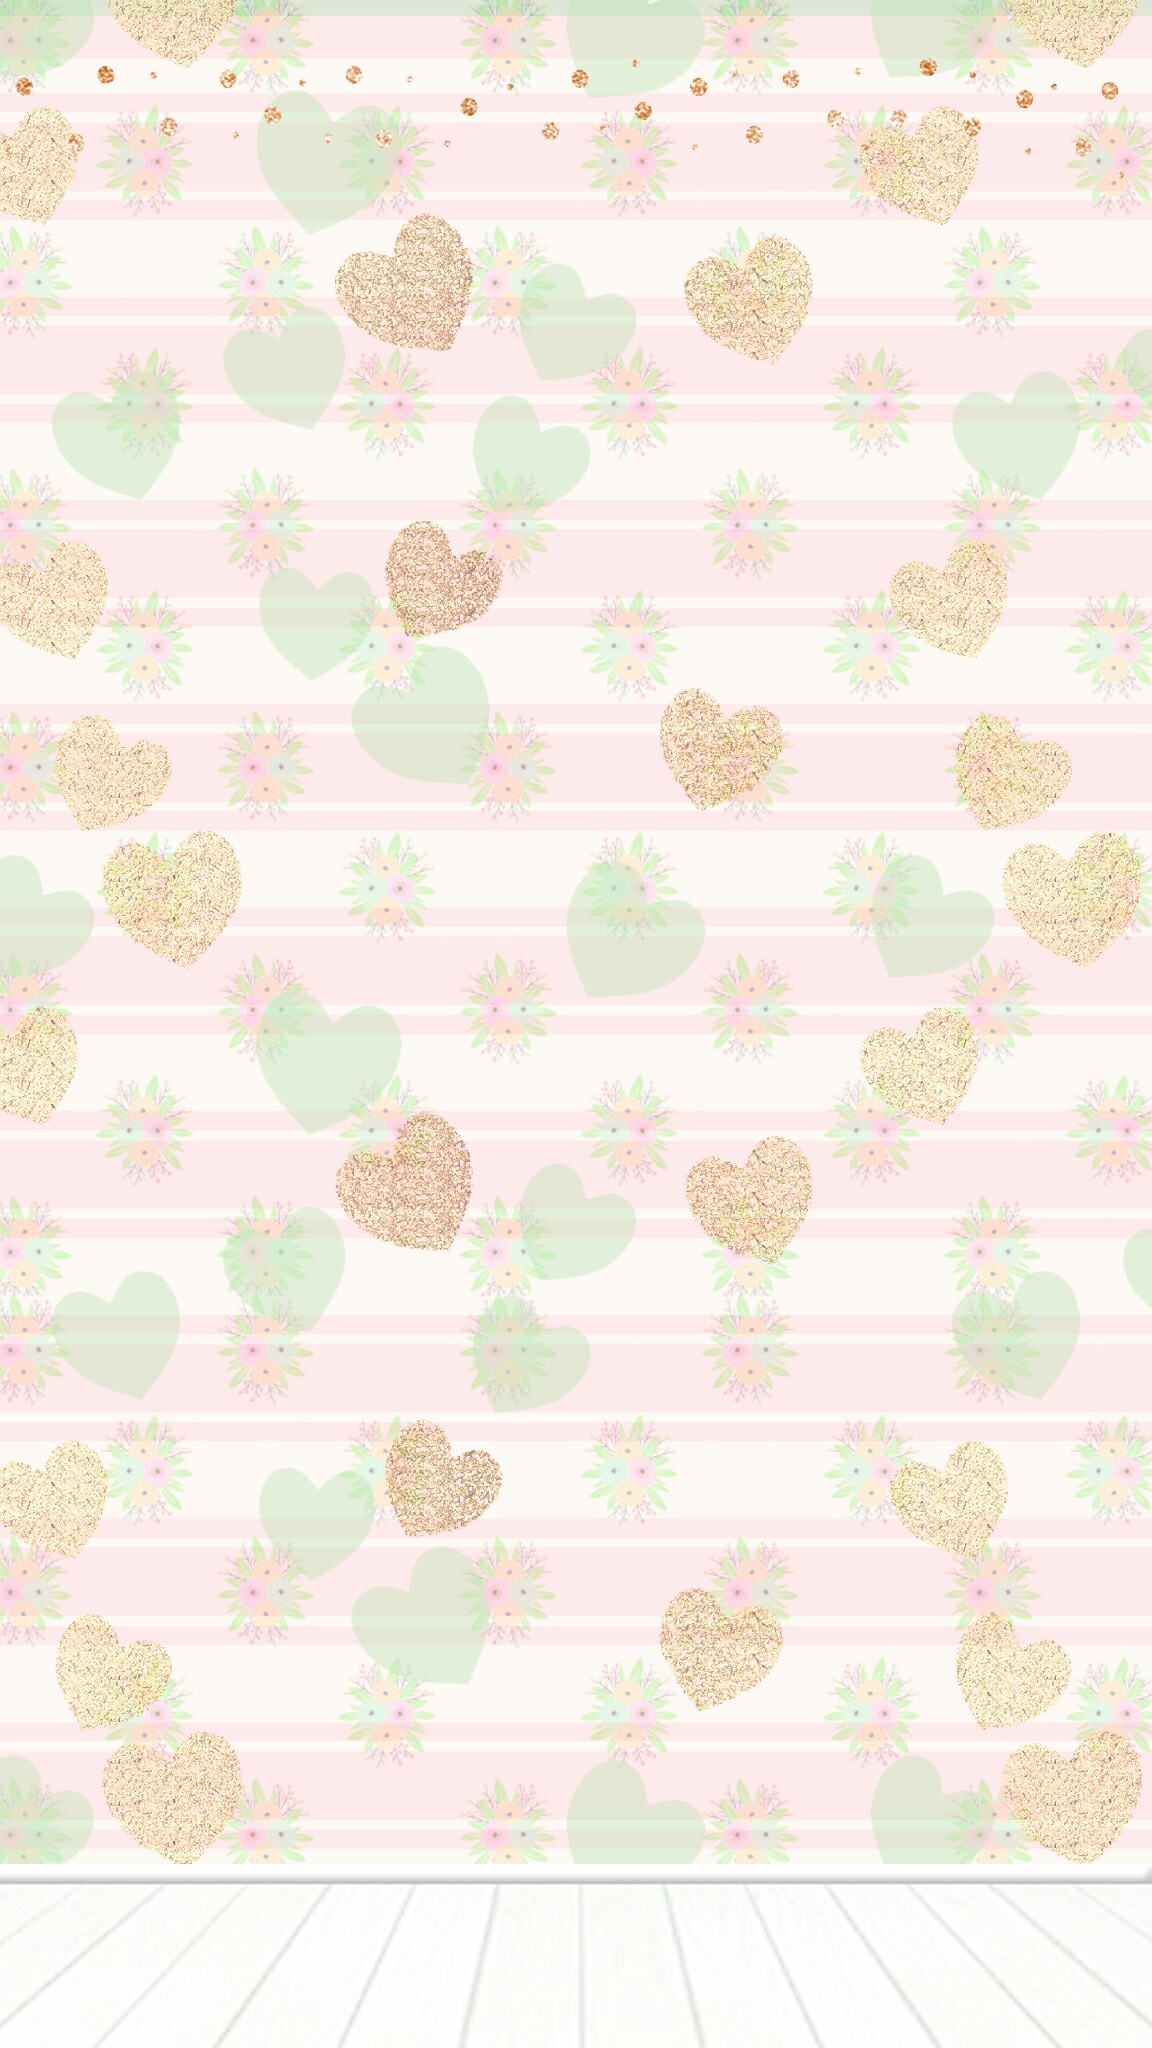 1152x2048 Iphone 2, Phone Backgrounds, Wallpaper Backgrounds, Cute Wallpapers, Phone  Wallpapers, Heart Wallpaper, Smartphone, Hello Kitty, Samsung